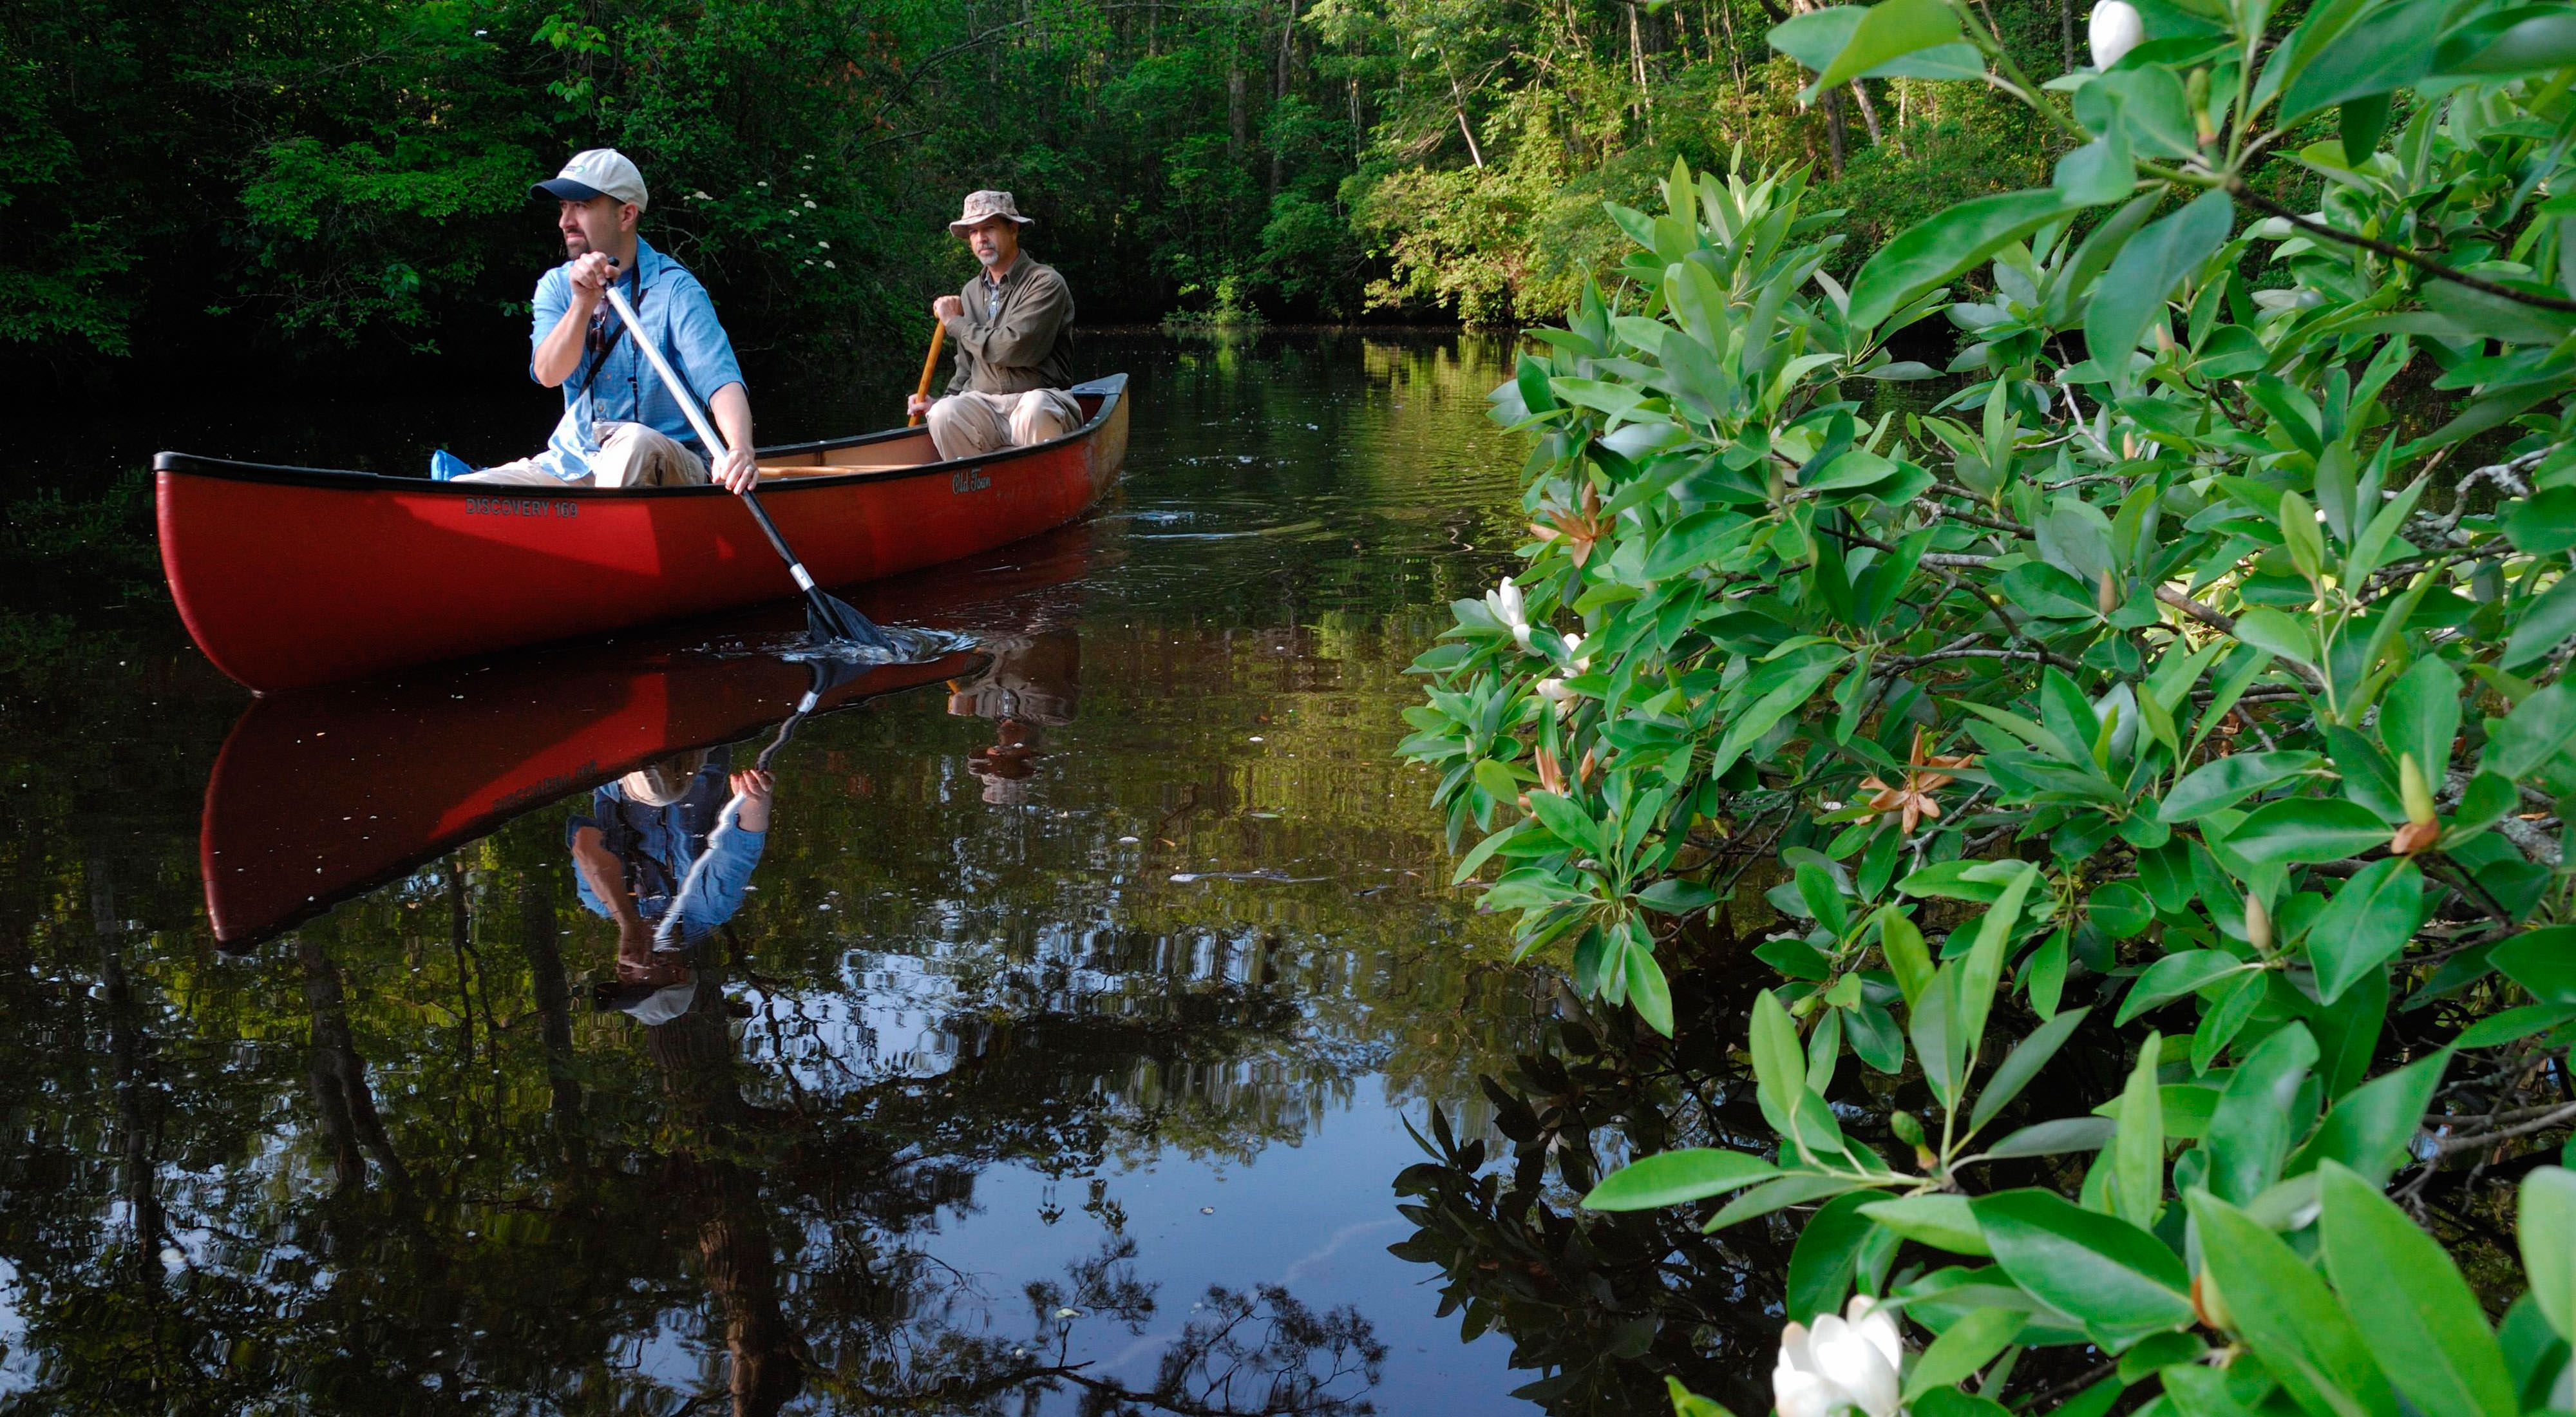 Two men paddle a red canoe through a heavily forested swamp. They and the surrounding trees are reflected in the still water.